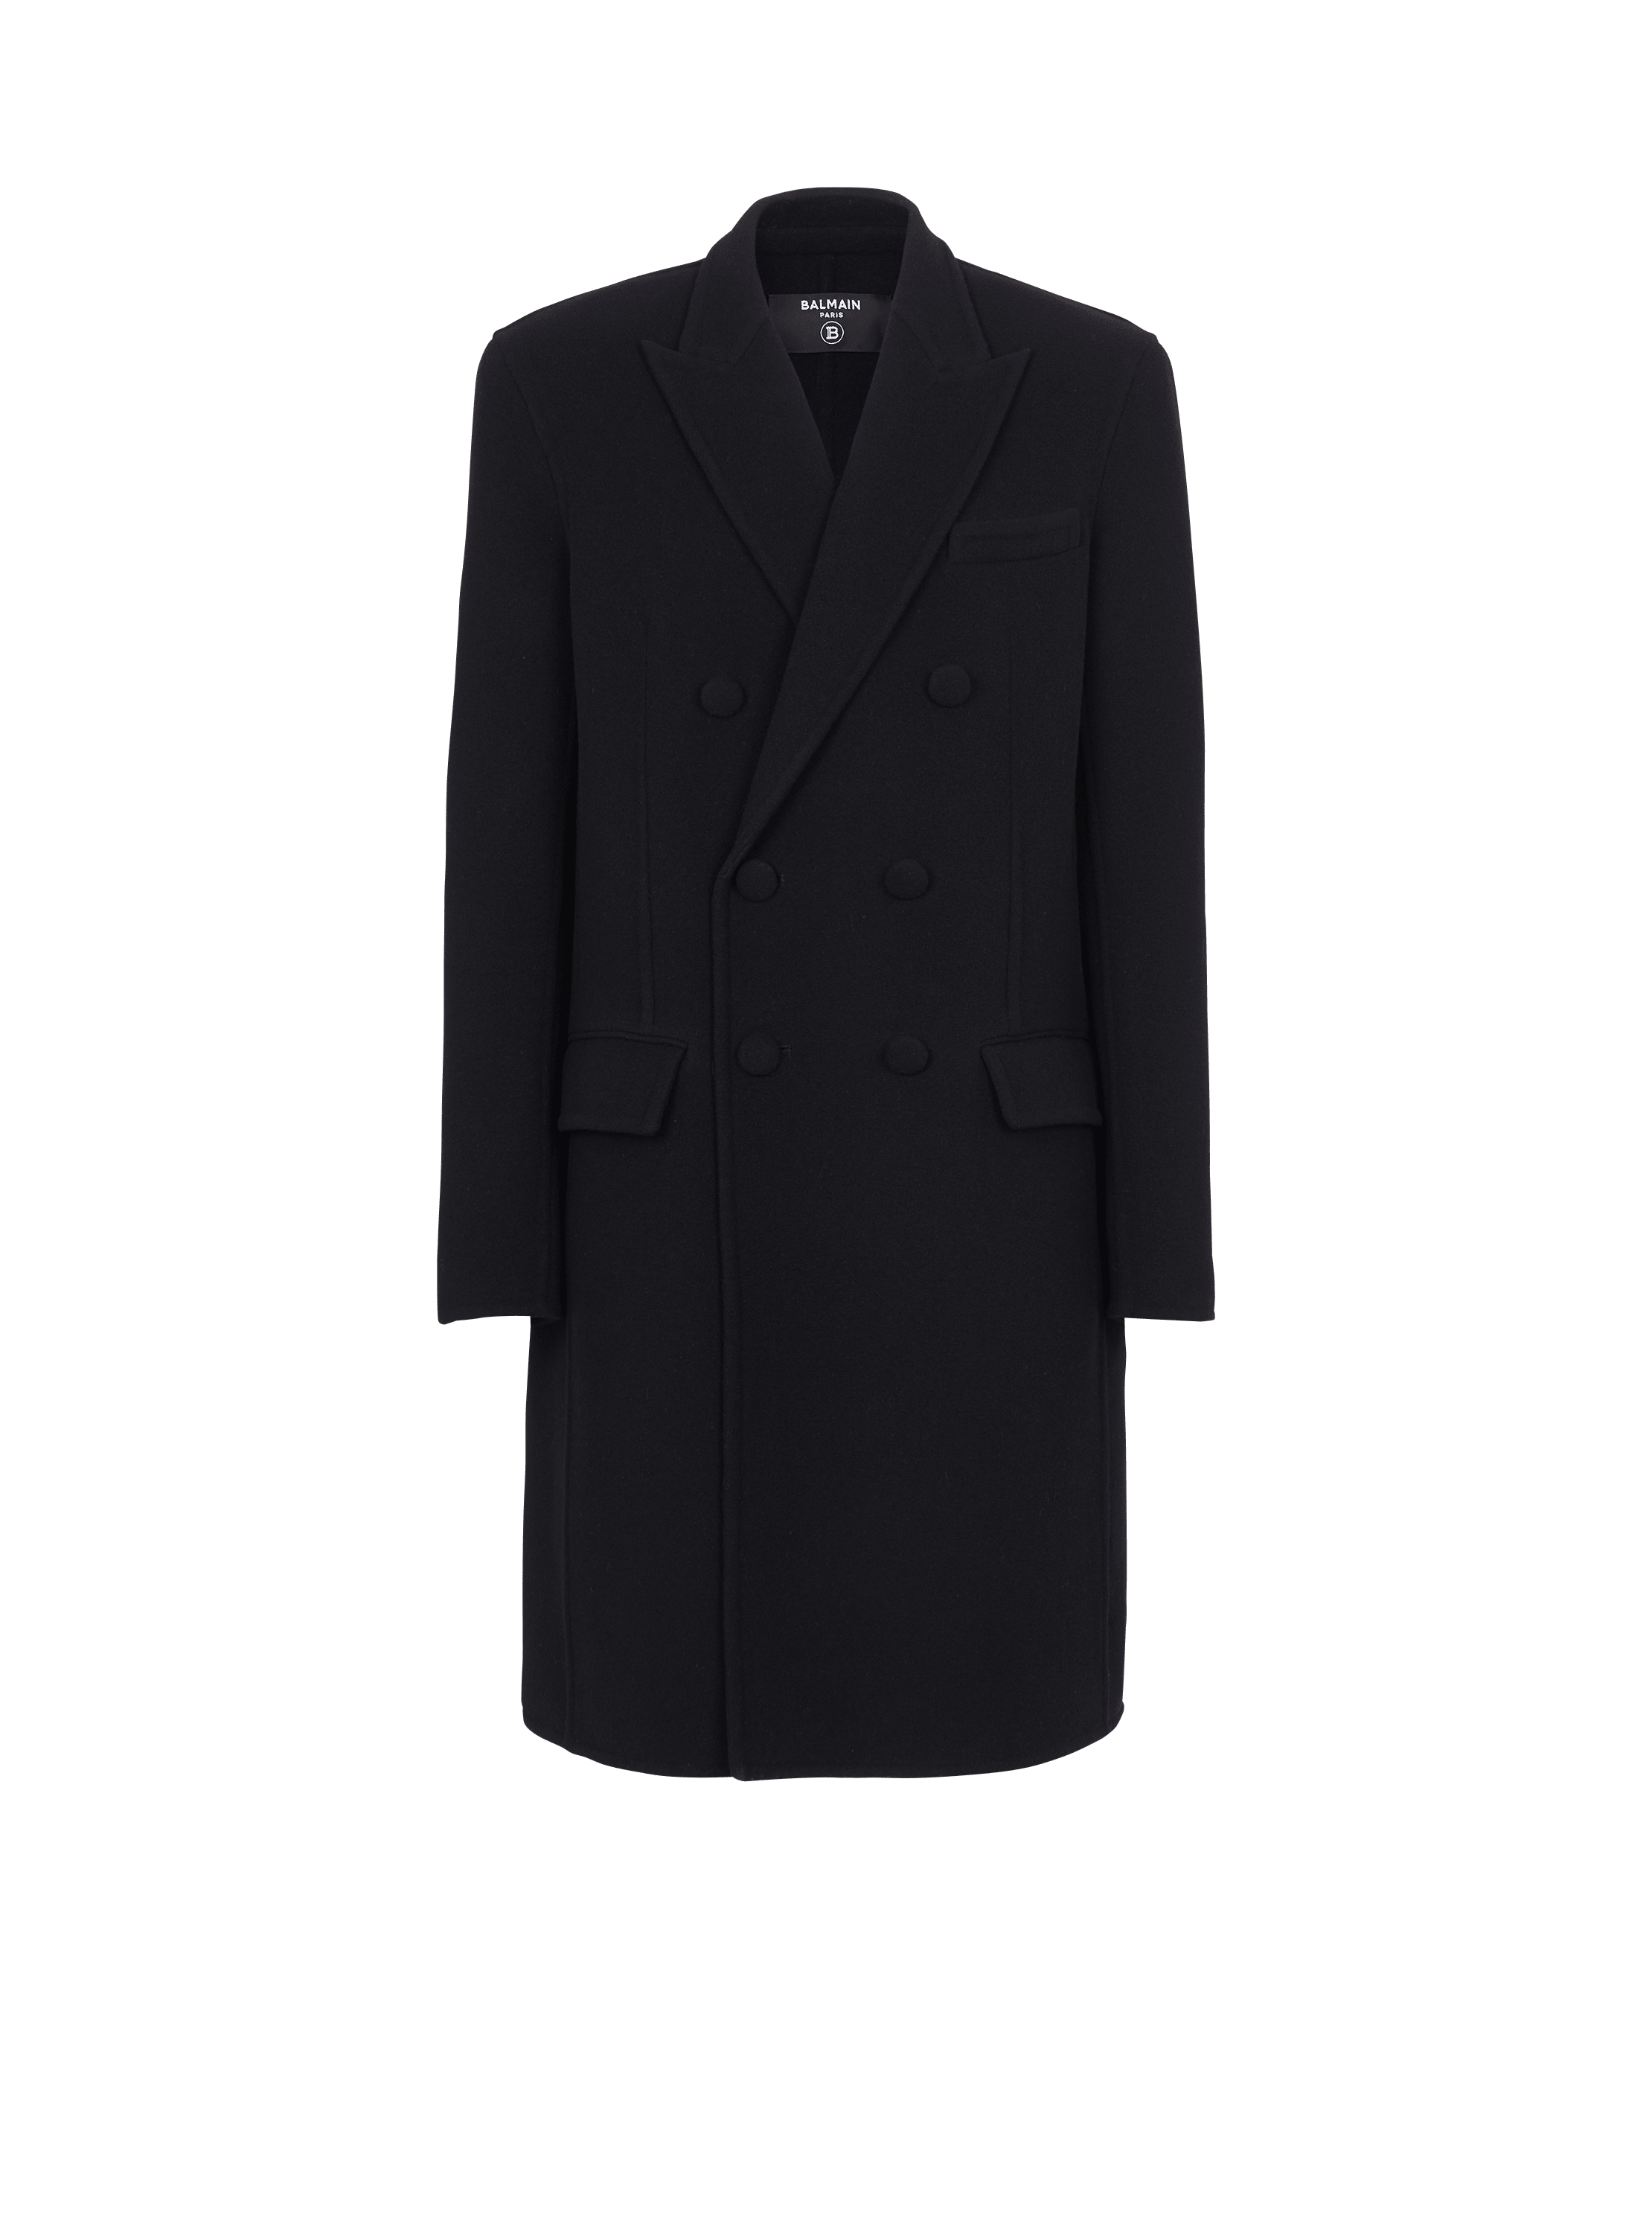 Double face wool and cashmere coat, black, hi-res